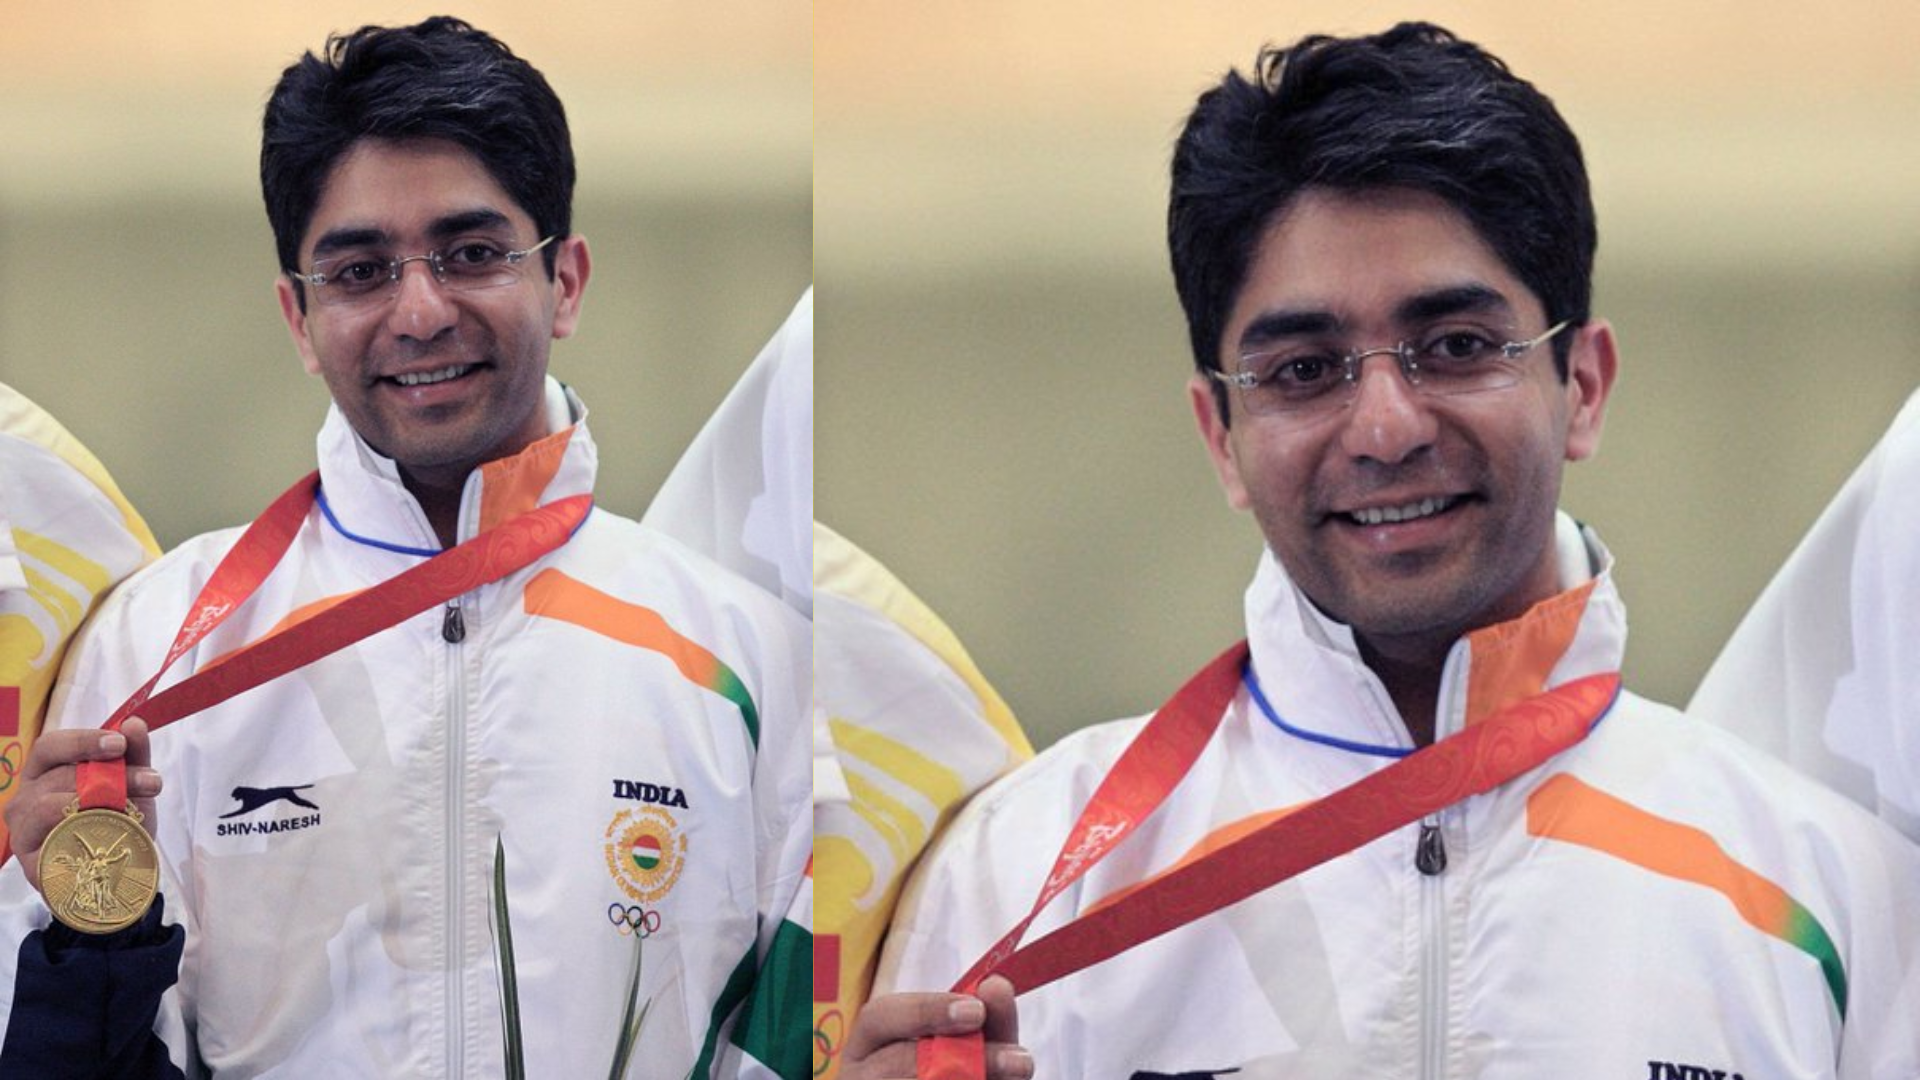 Abhinav Bindra Honored With Olympic Order, Highest Recognition Award From IOC